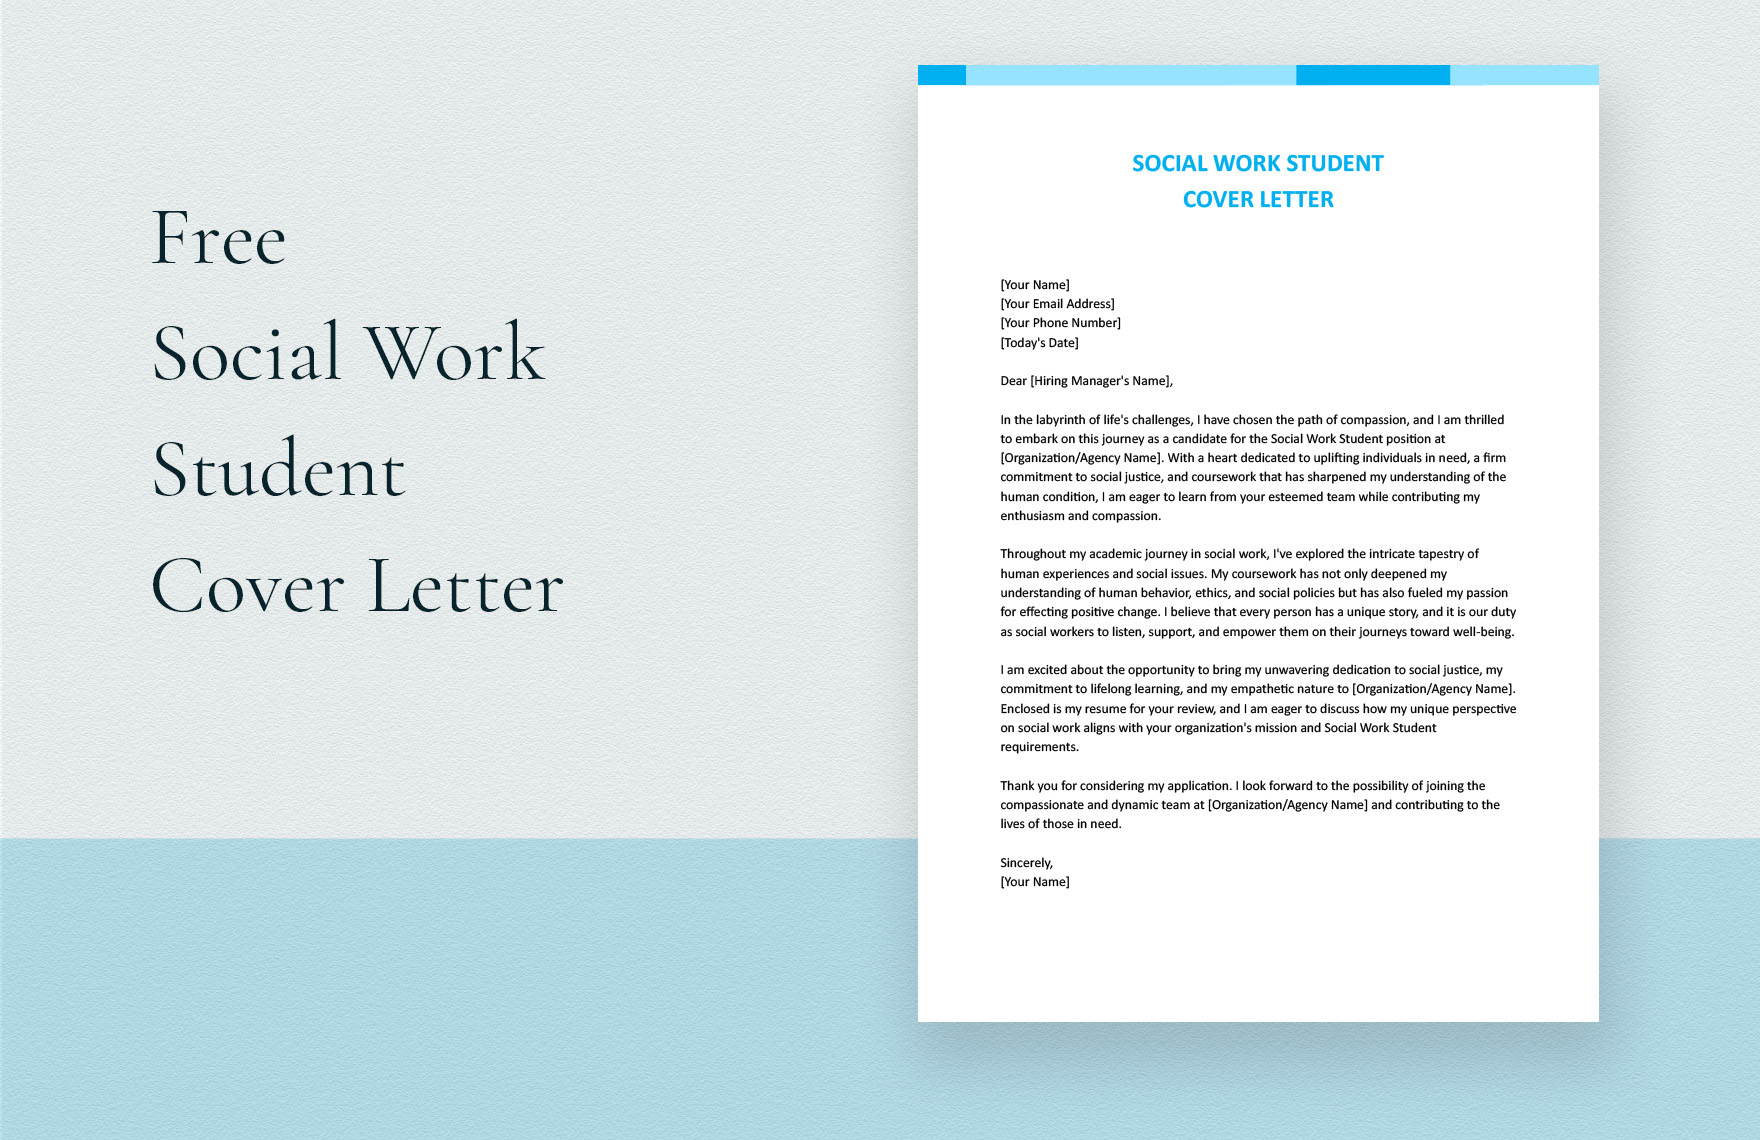 Social Work Student Cover Letter in Word, Google Docs